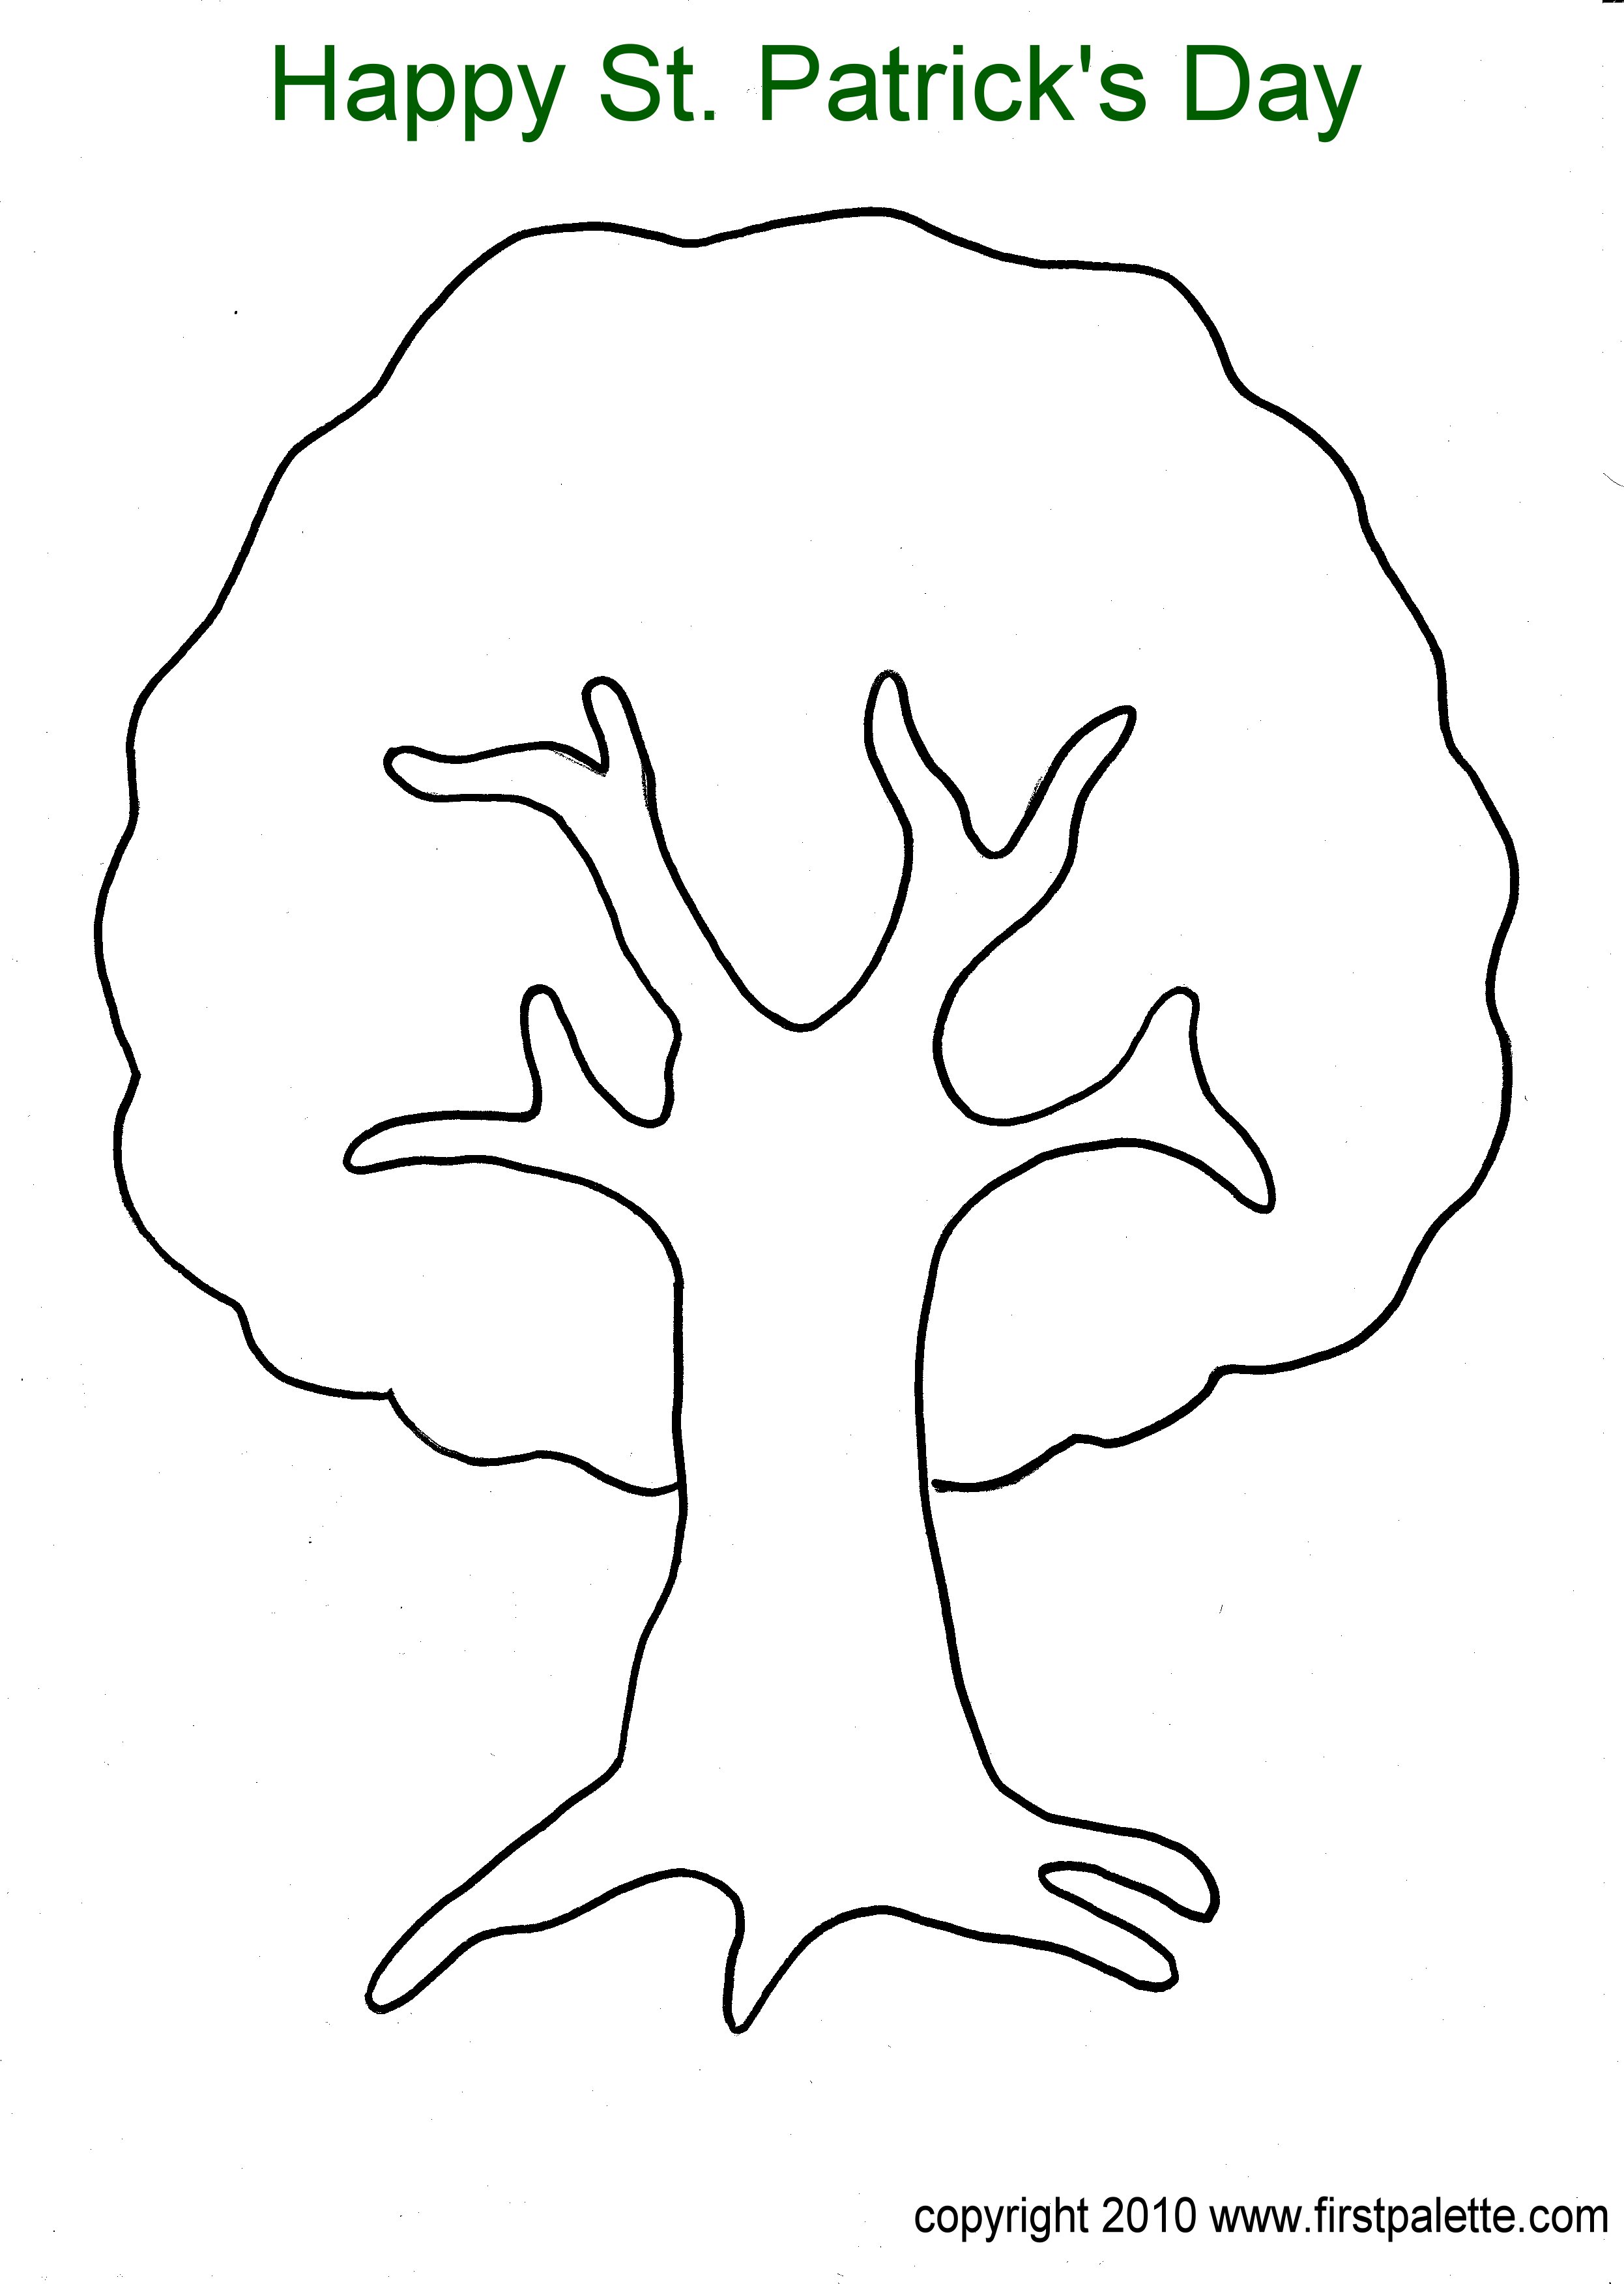 Free Stencil Of A Tree Outline, Download Free Stencil Of A Tree Outline